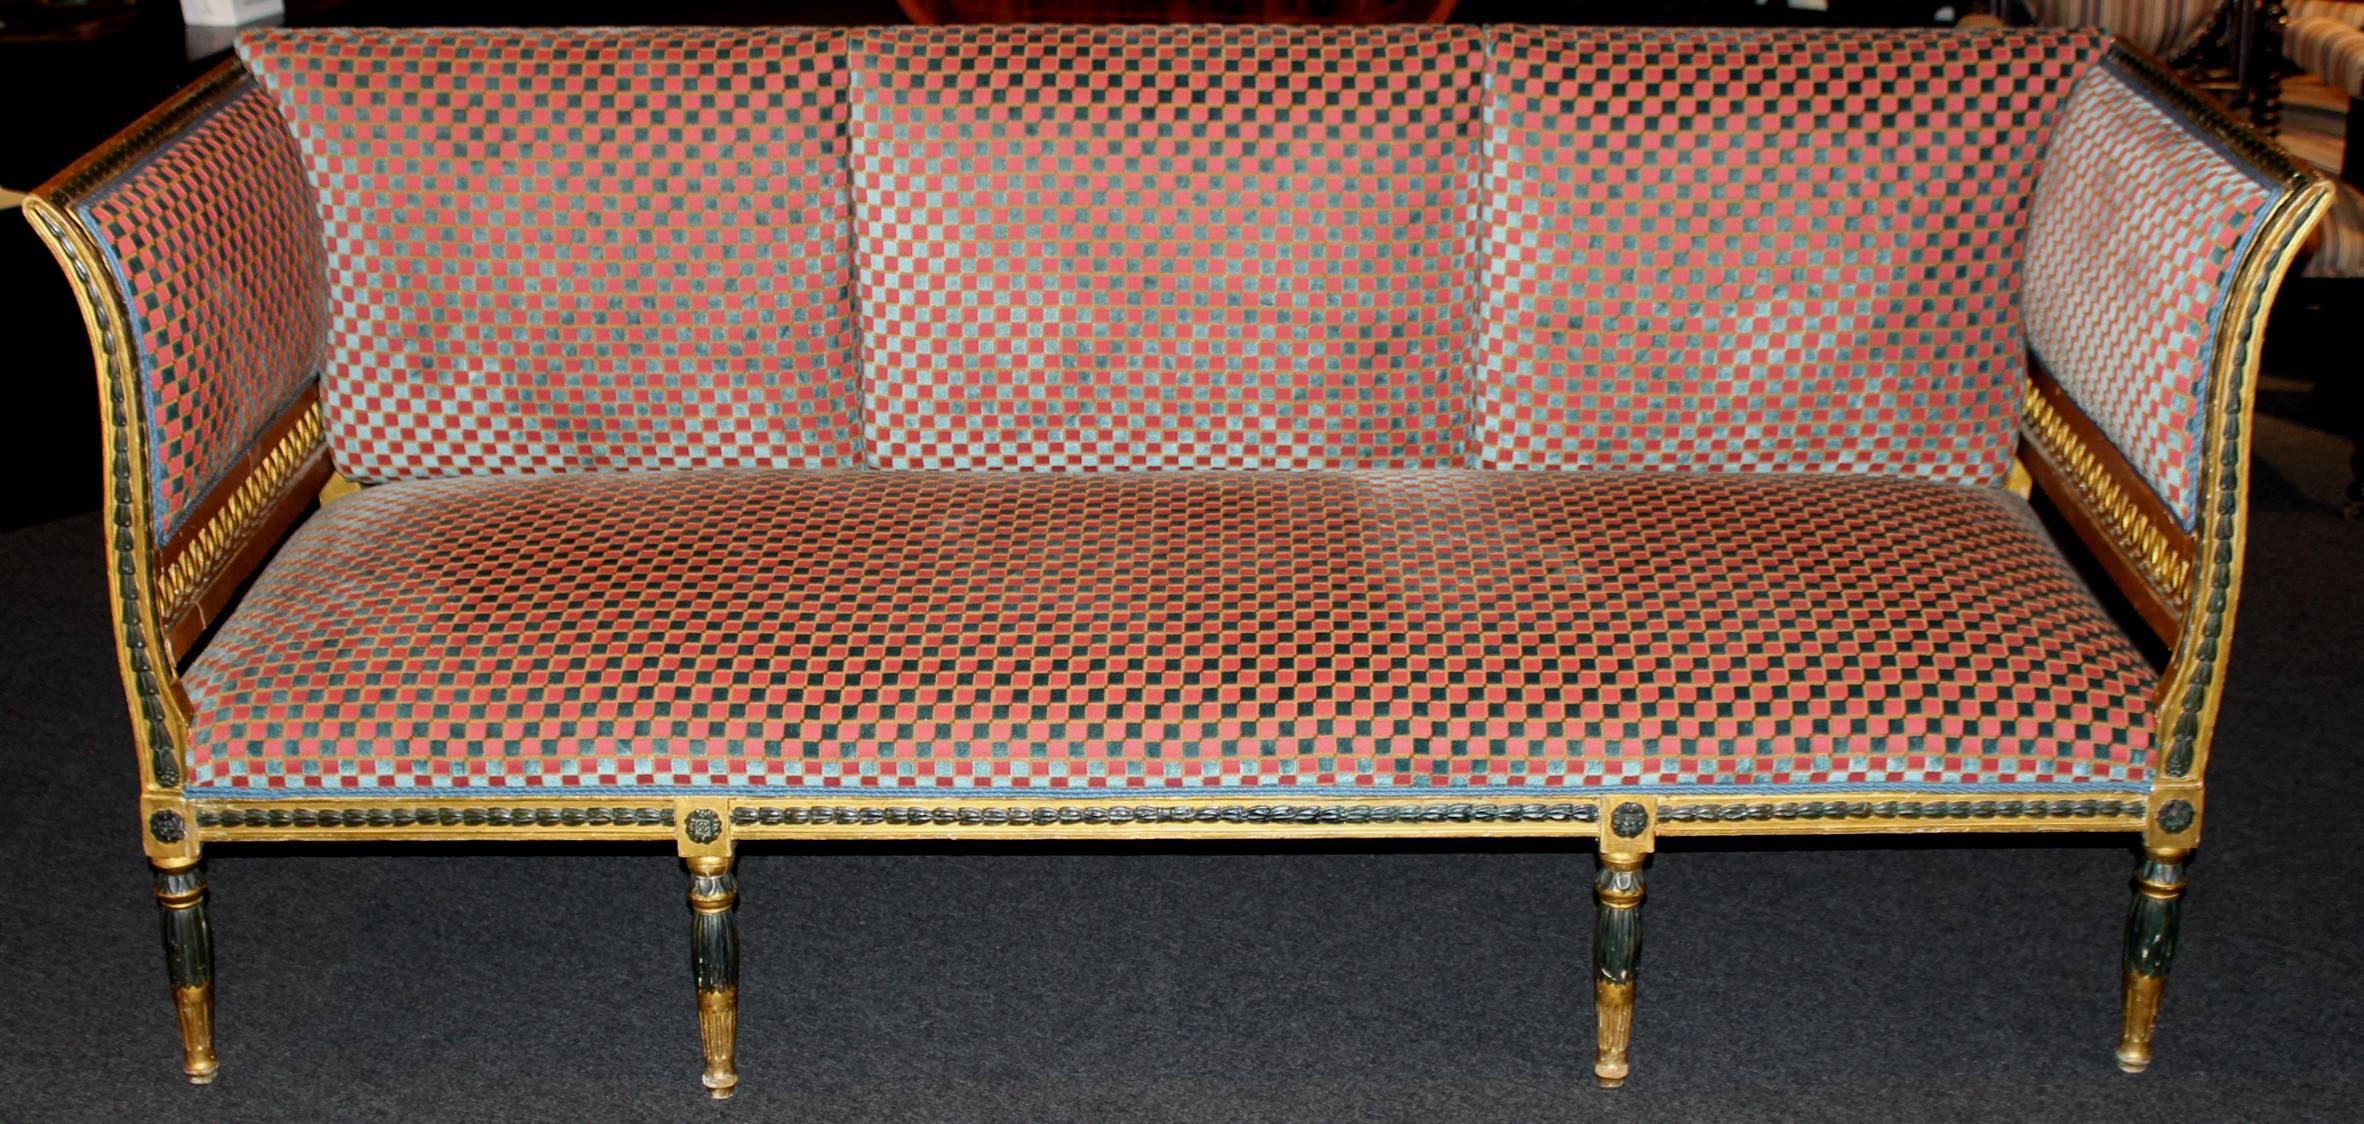 A Gustavian period neoclassical giltwood and polychrome sofa with stiles and rails decorated with carved bellflowers and reticulated side panels. Rear back supports probably a later addition, circa 1800, Sweden.